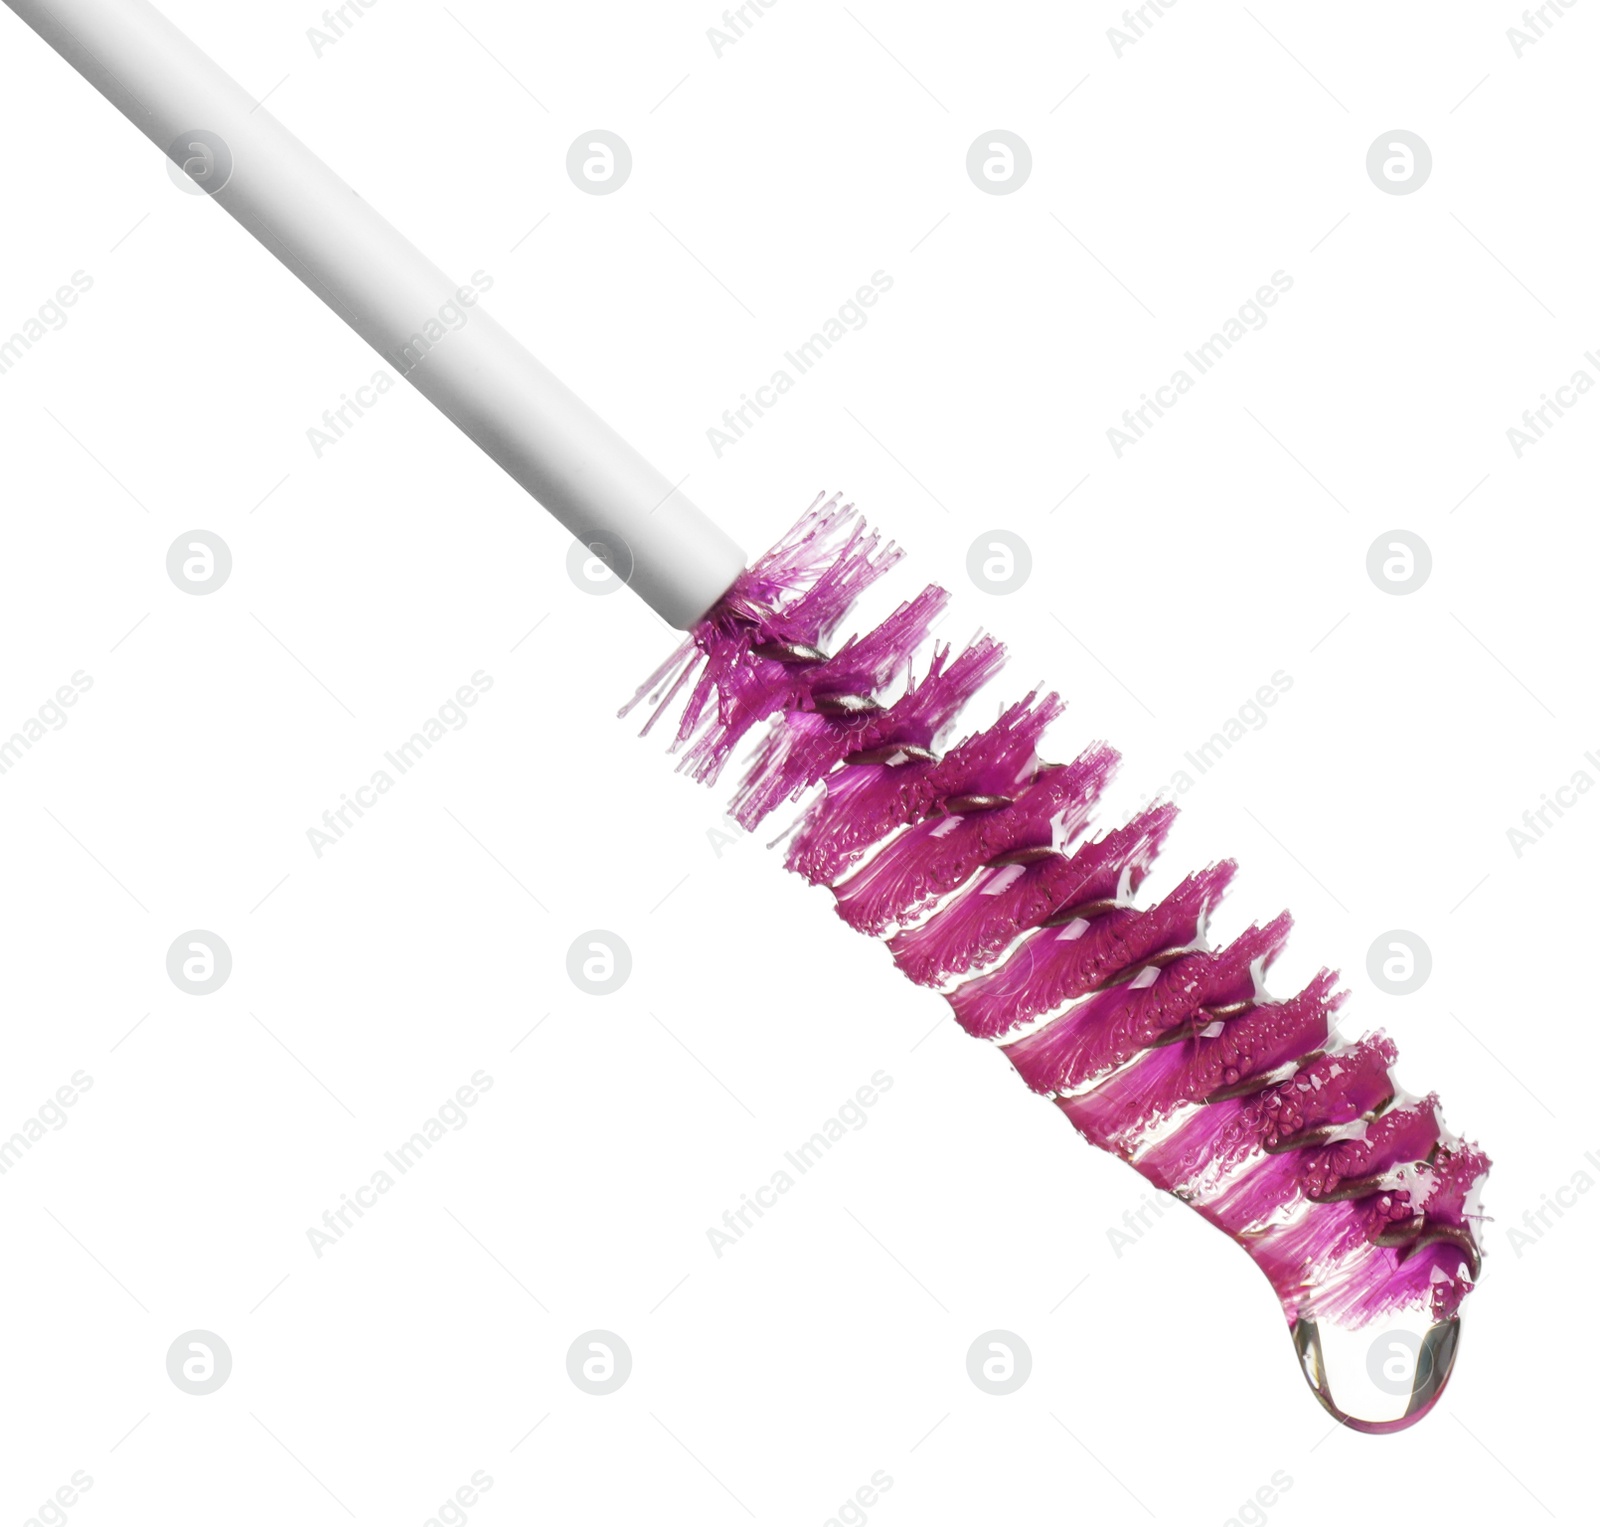 Photo of Drop of eyelash oil falling down from brush on white background